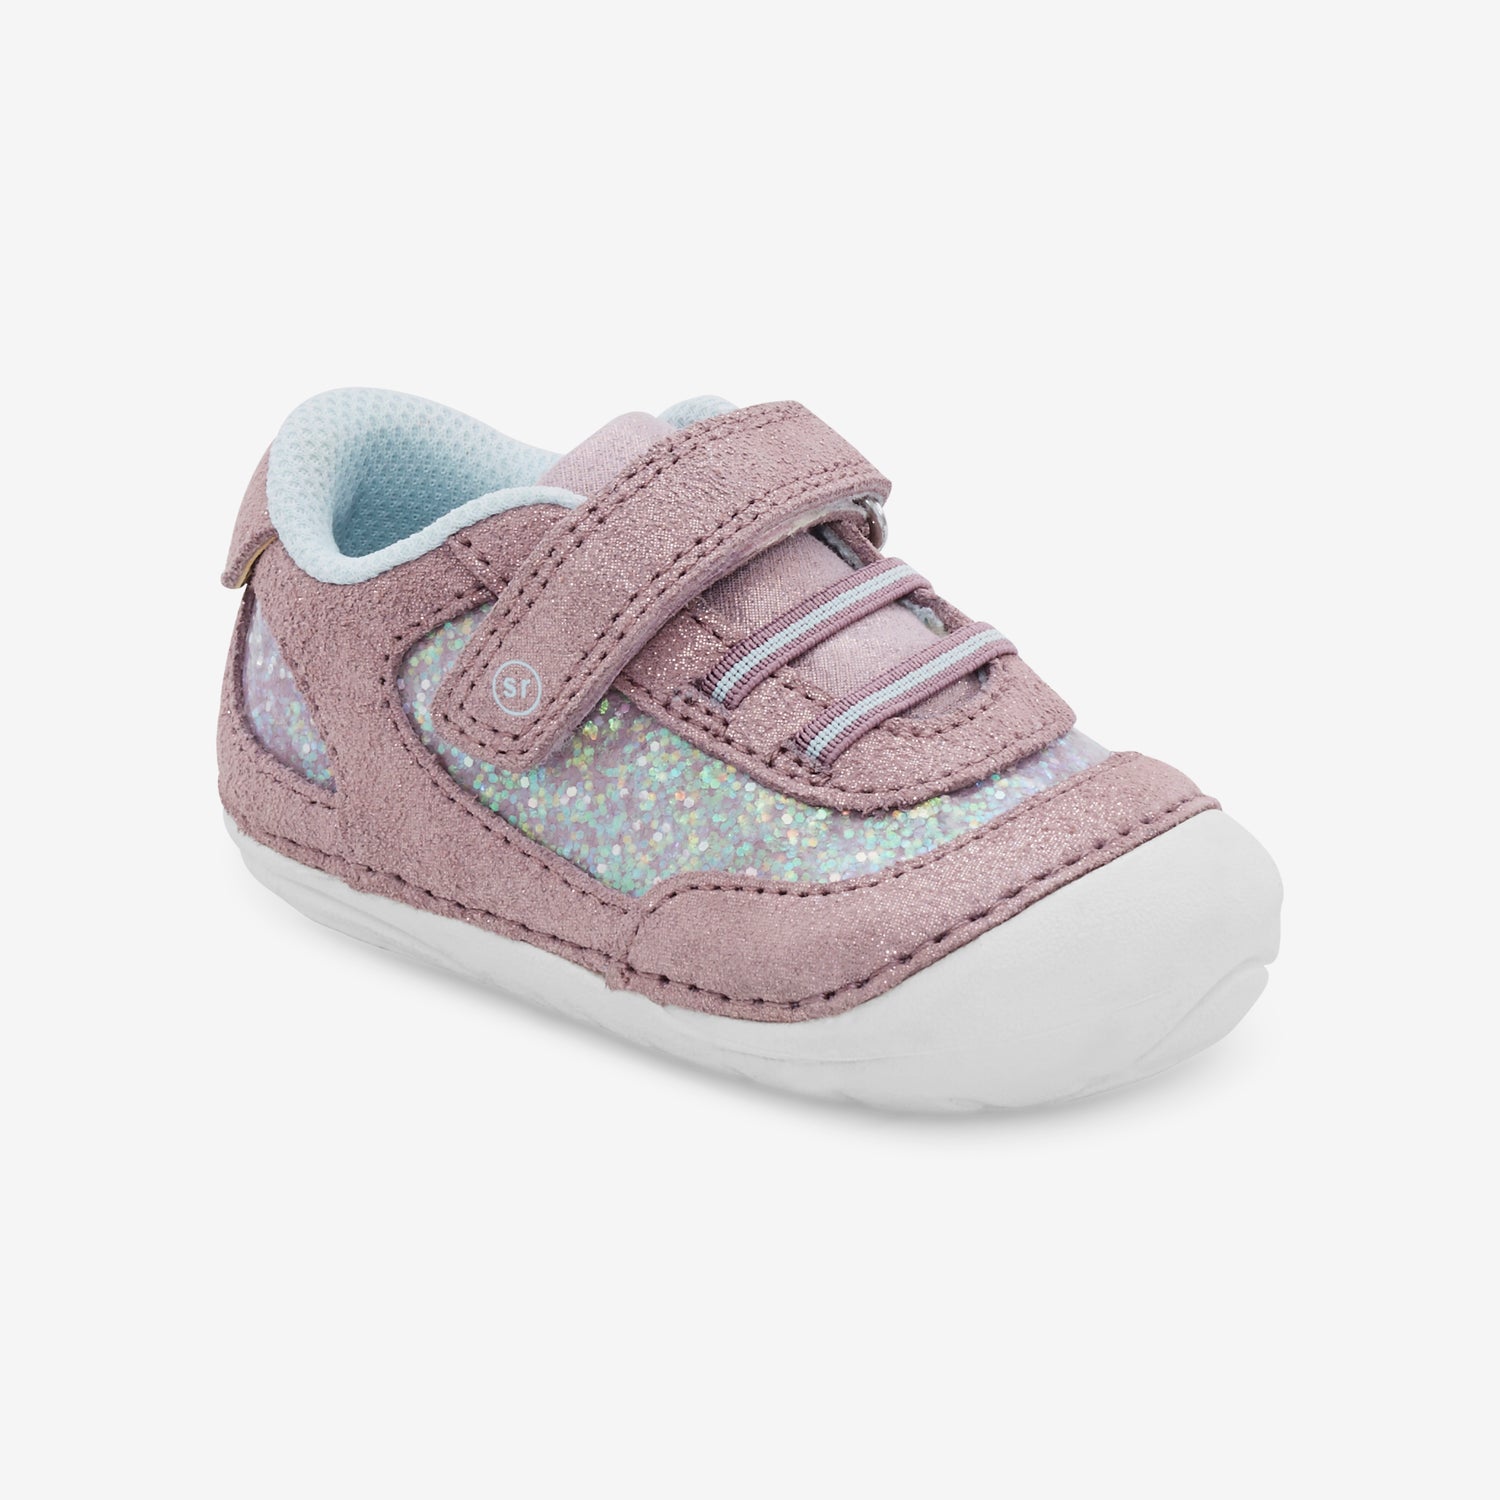 Shoes in For Baby for New